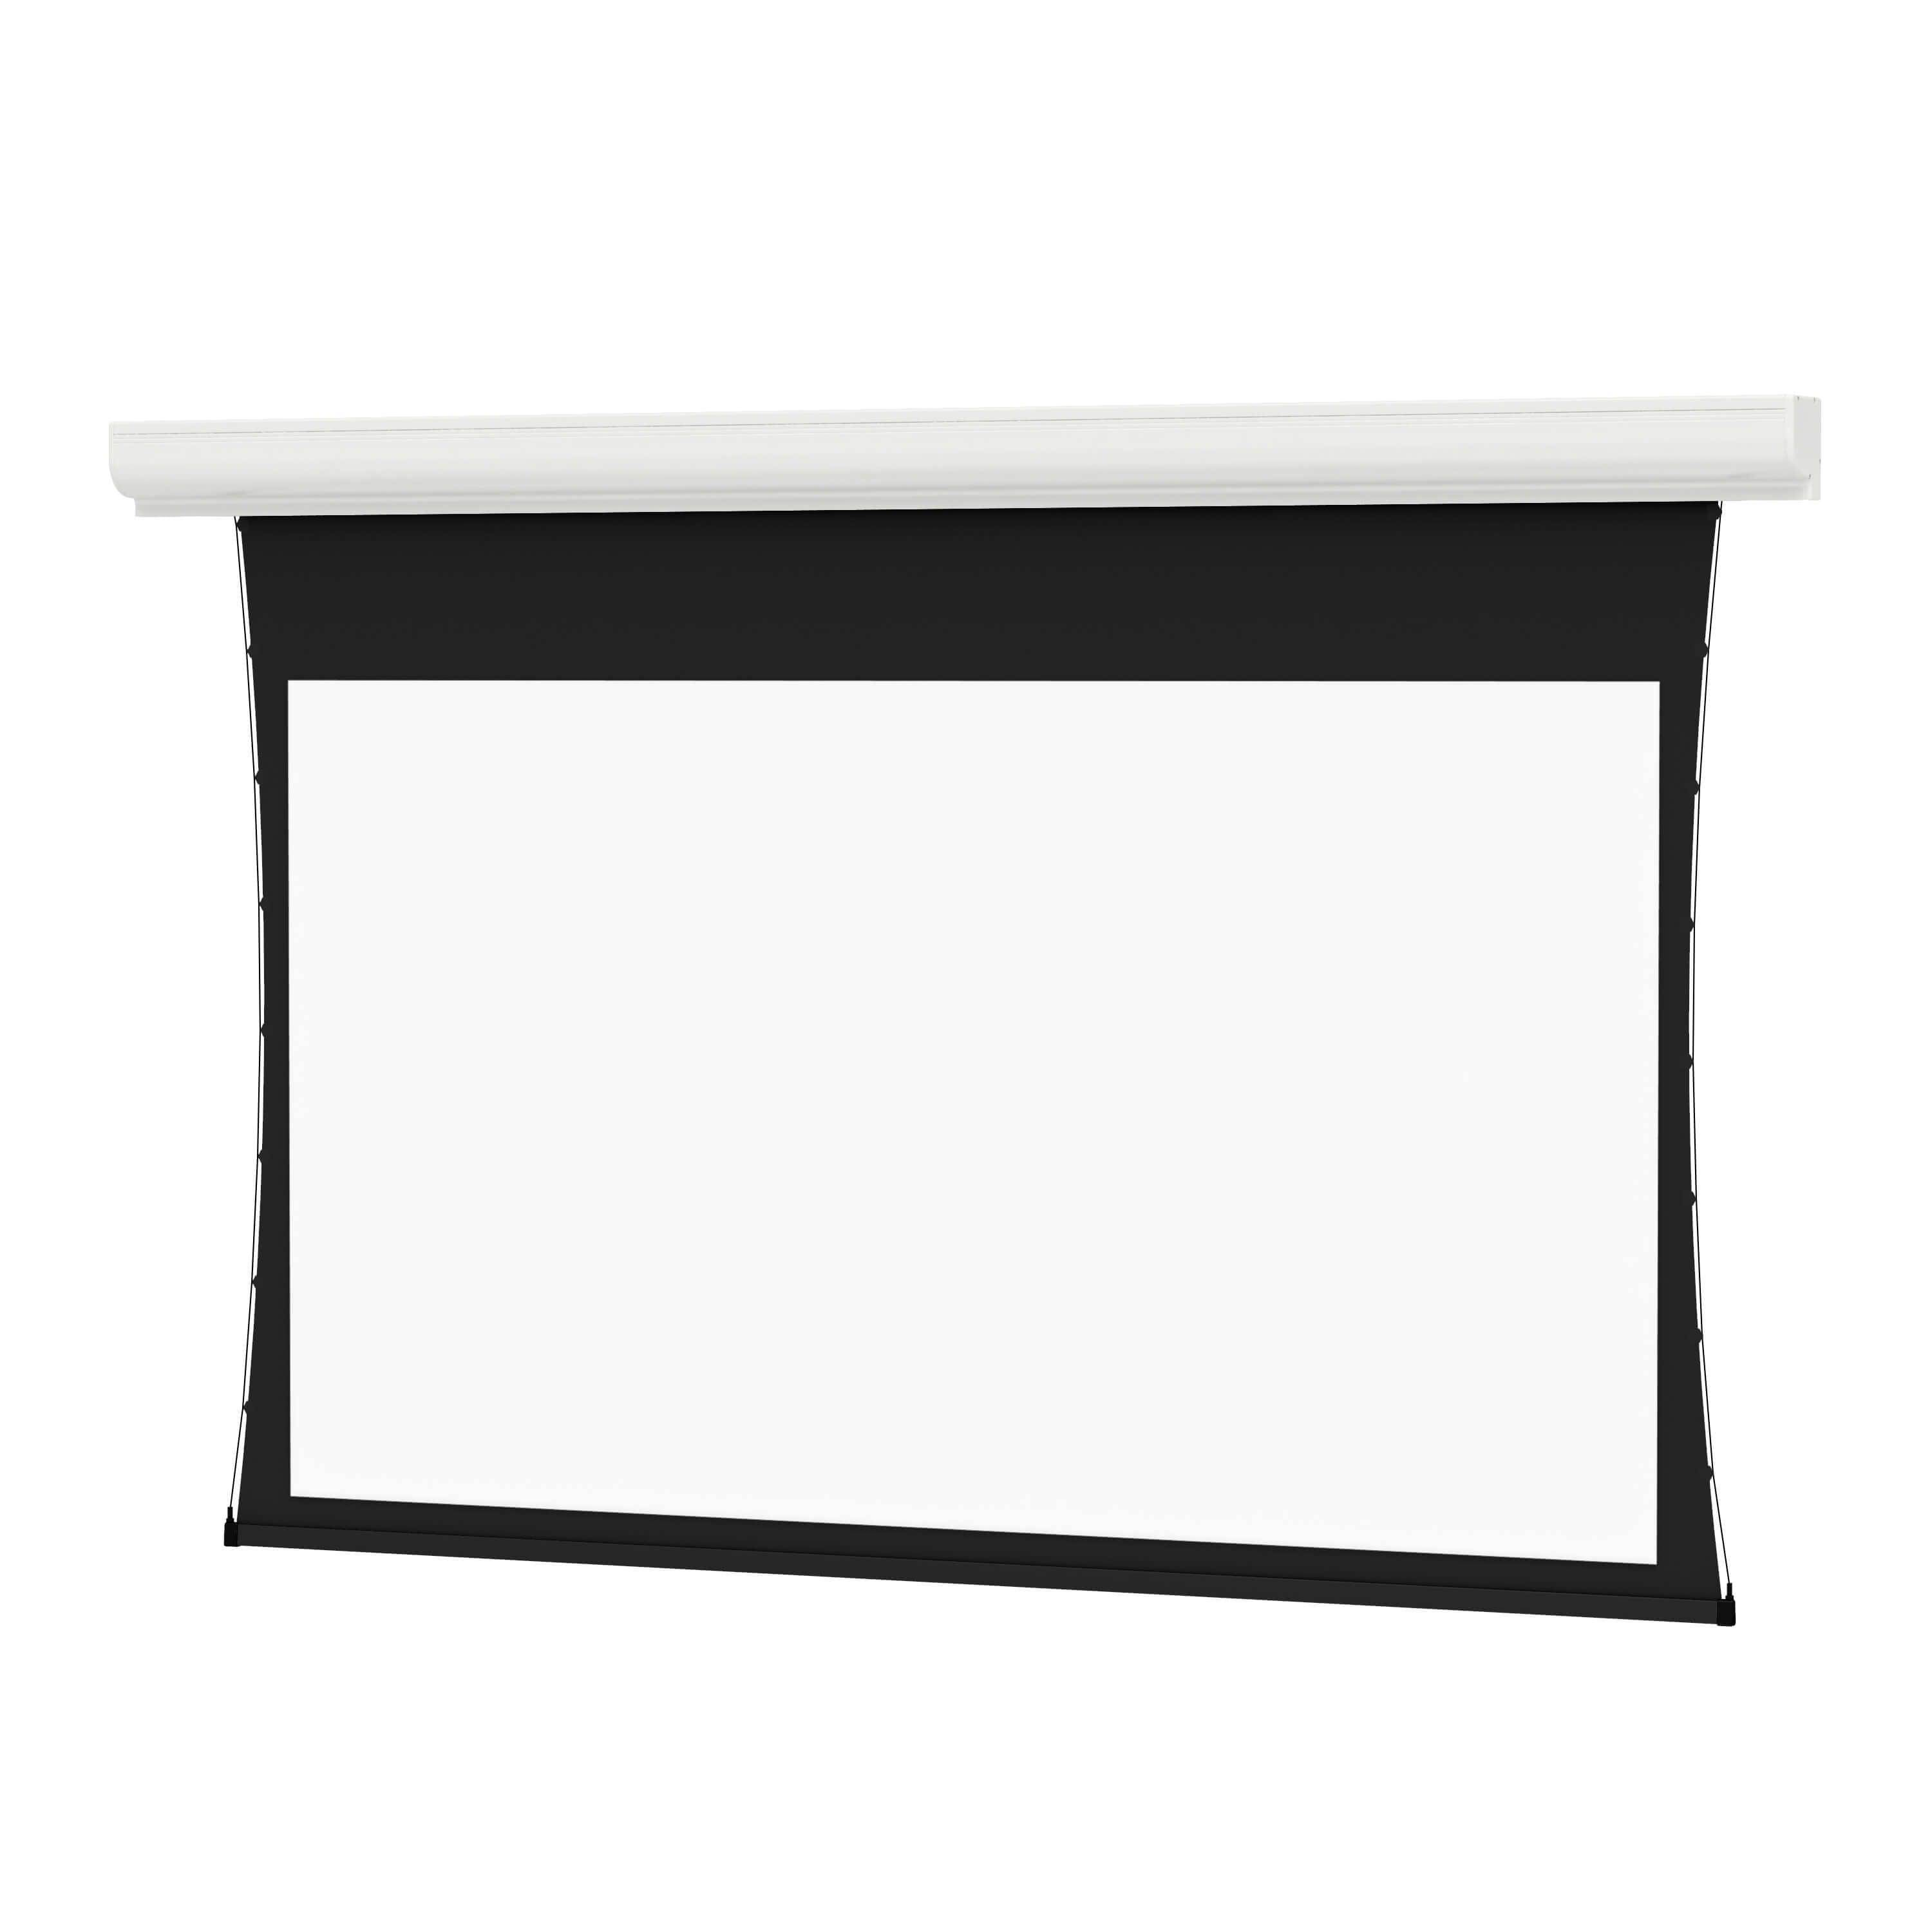 Da-Lite Tensioned Contour Electrol - Wall or Ceiling Mounted Electric Screen with white case